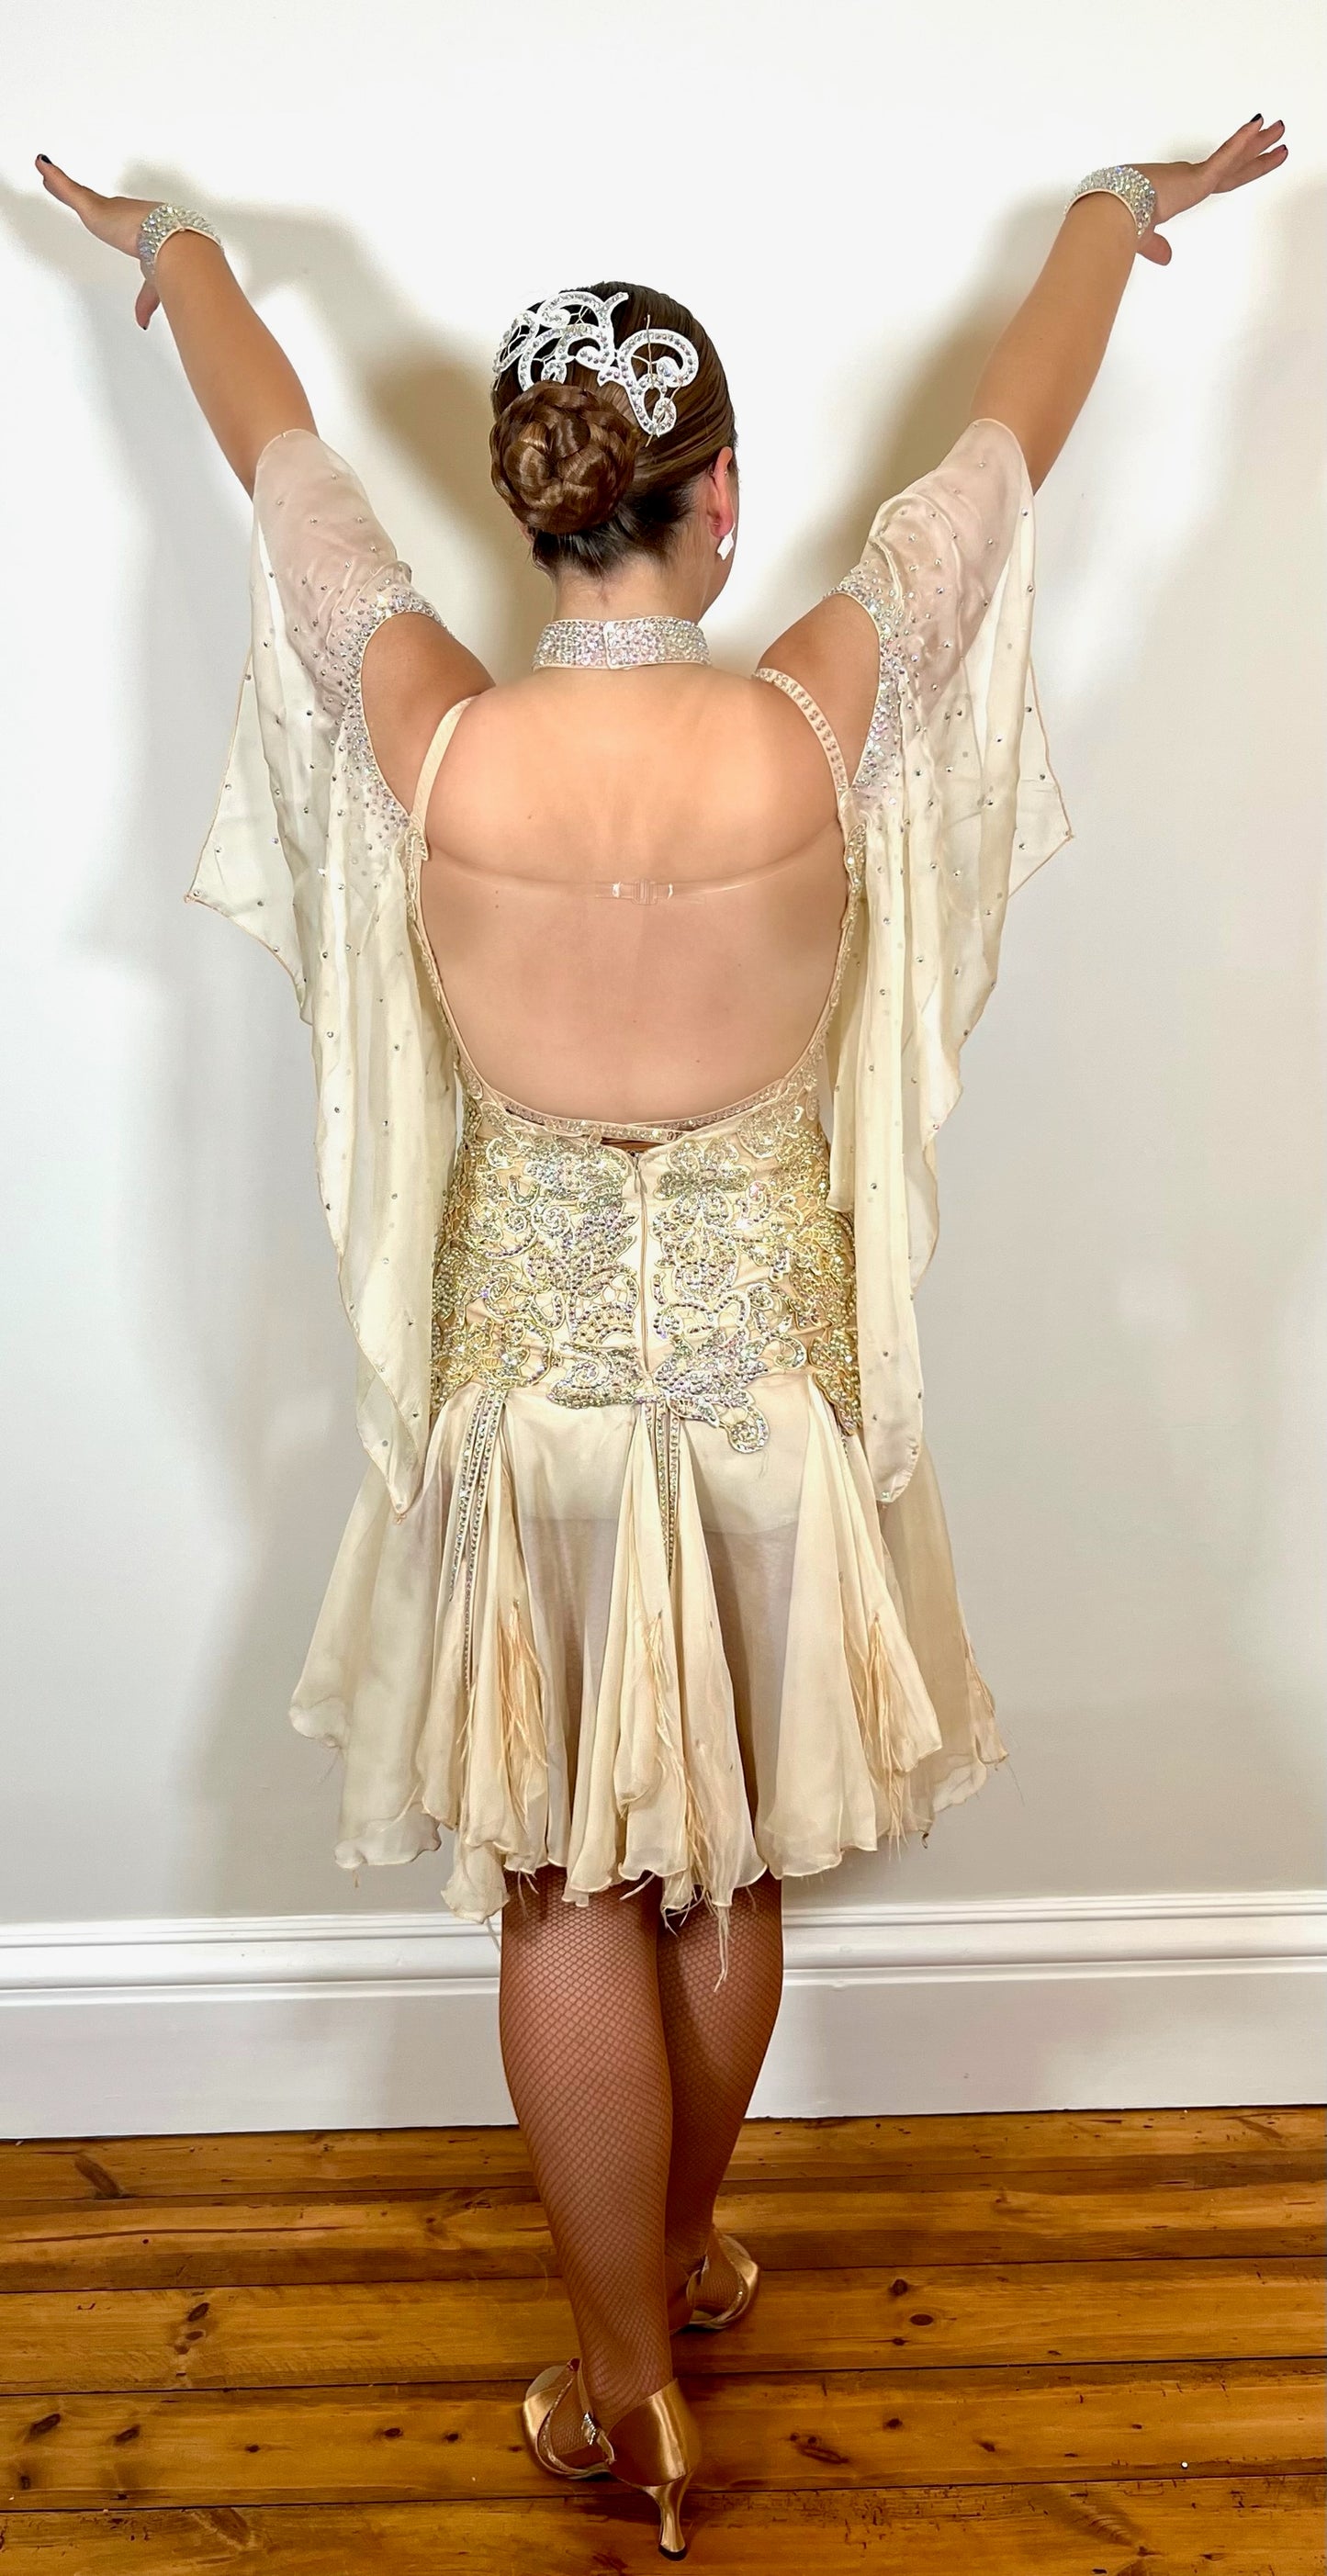 210 Champagne Latin dress fully decorated in champagne motifs & stones. Chiffon skirt with godets & ostrich feather detail